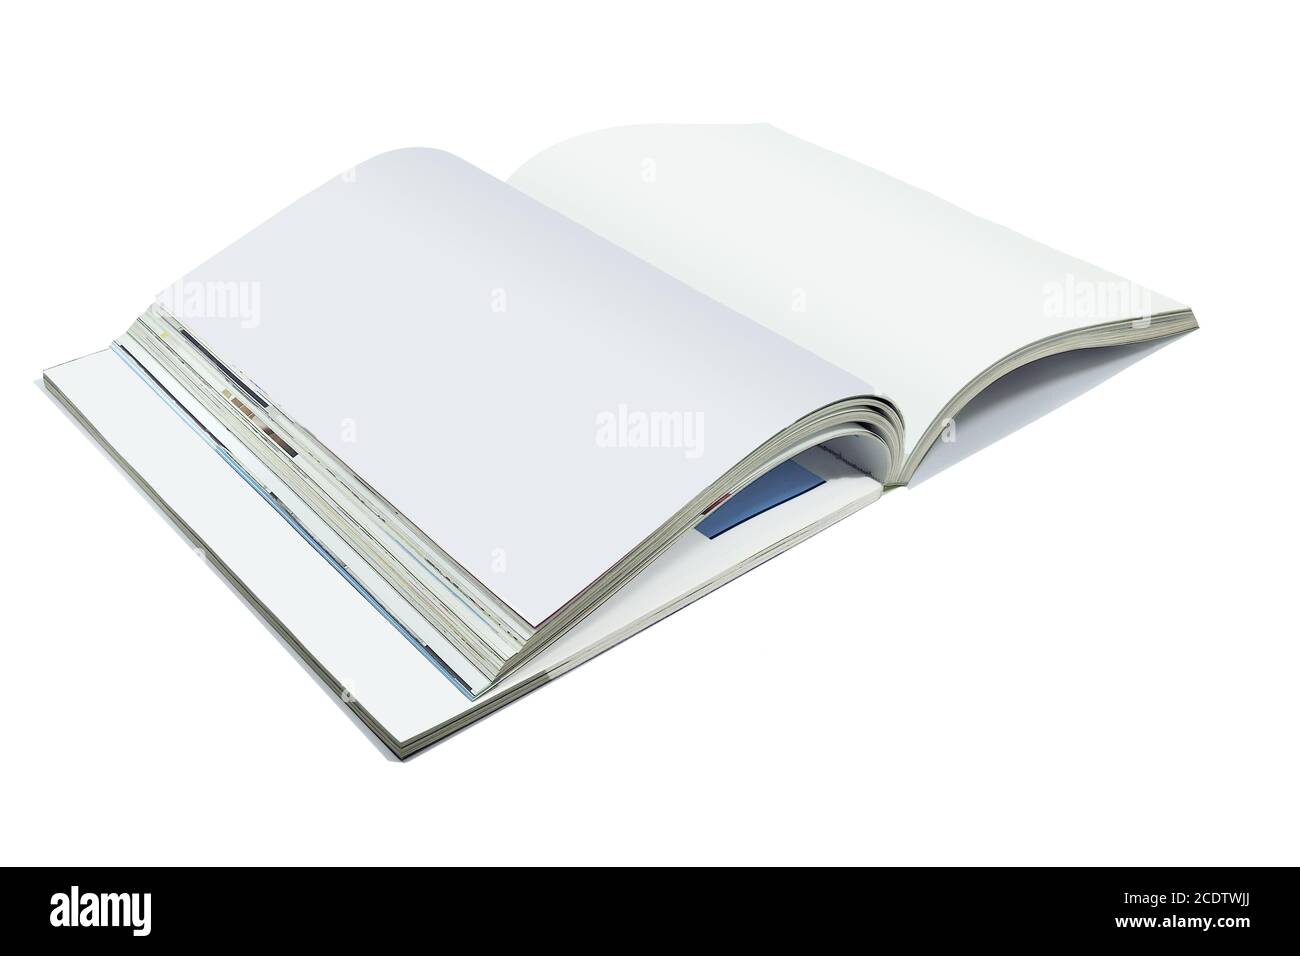 Opened blank pages of magazine or book, catalog isolated on white Stock Photo